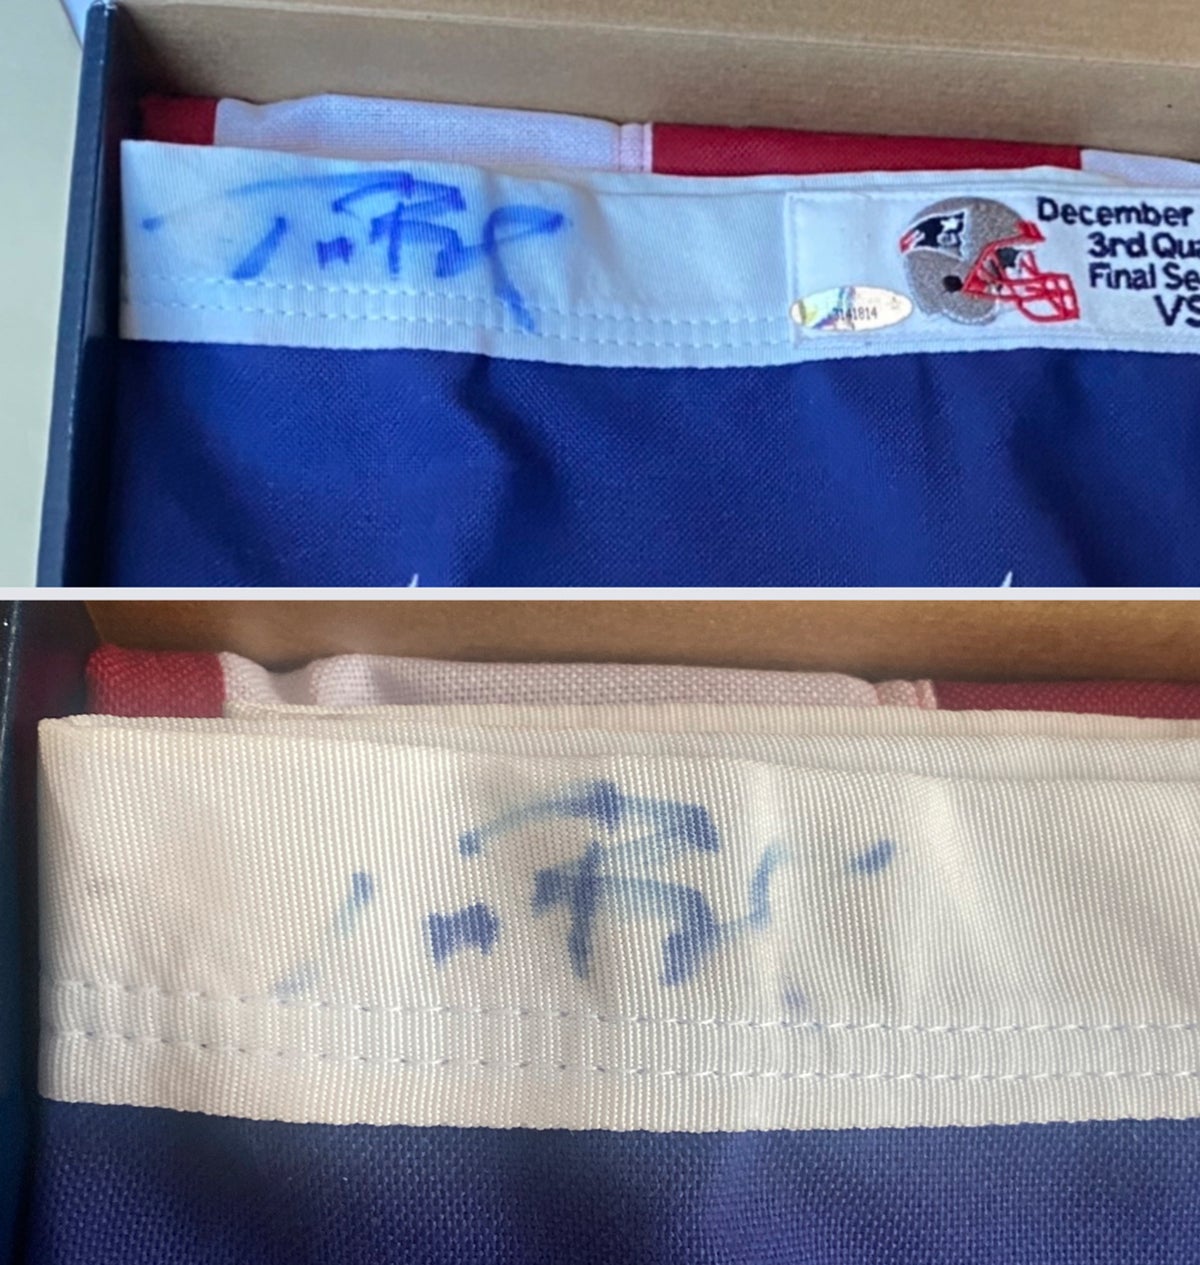 Fan sues Patriots, says they ruined his Brady-signed flag